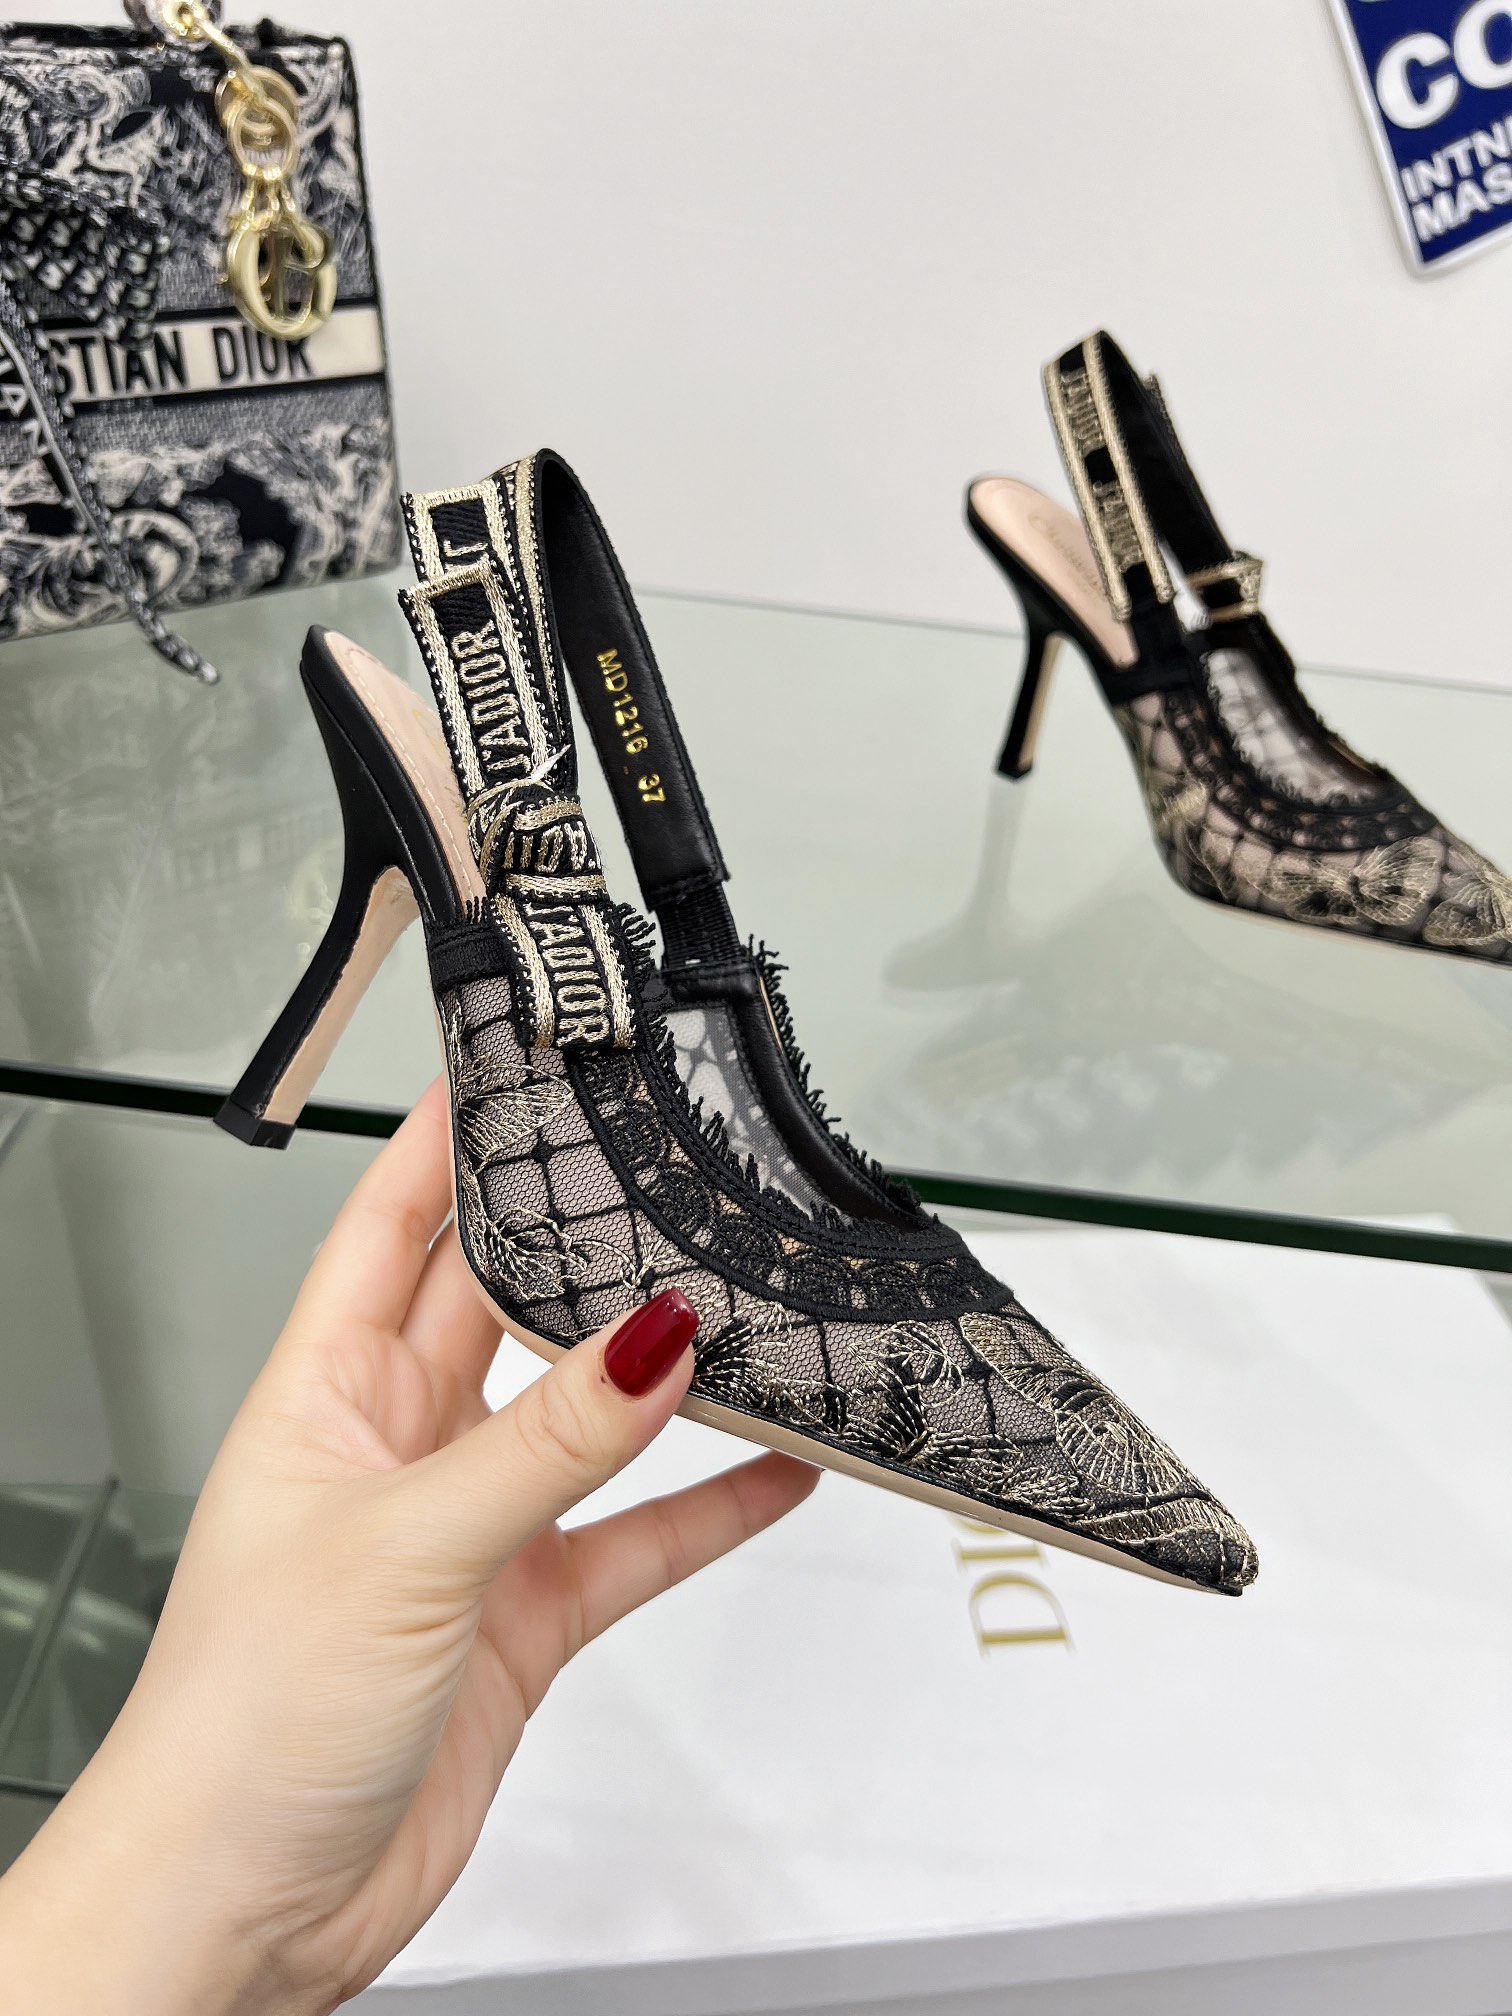 AAAA Customize
 Dior Replica
 Shoes High Heel Pumps Embroidery Genuine Leather Sheepskin Spring/Summer Collection